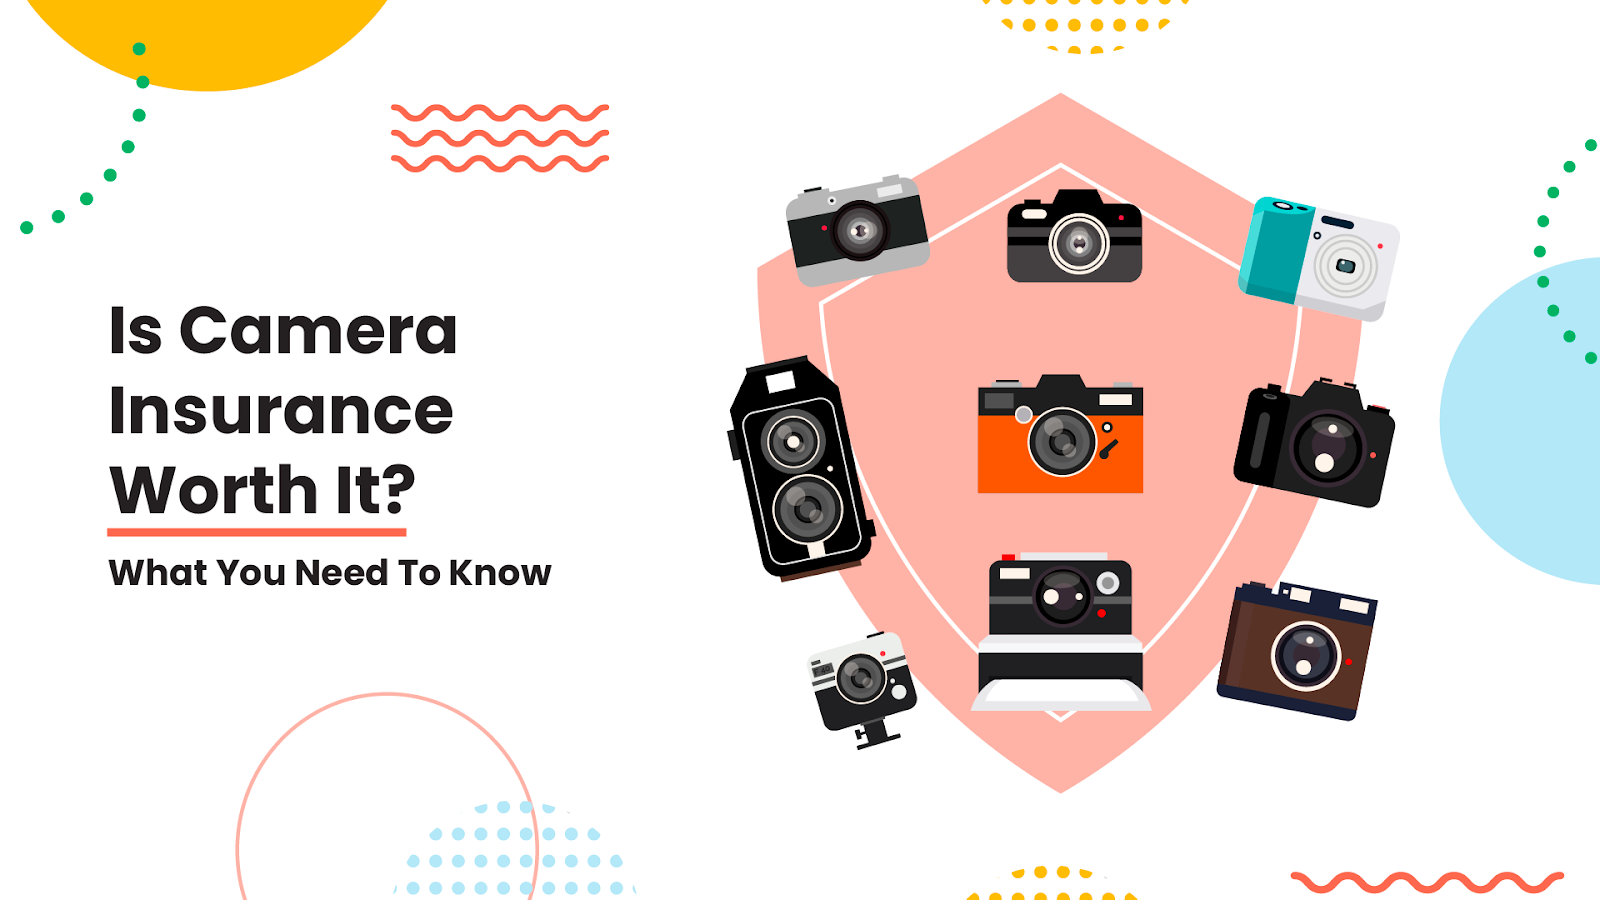 Camera insurance can help protect you from paying to replace damaged gear.